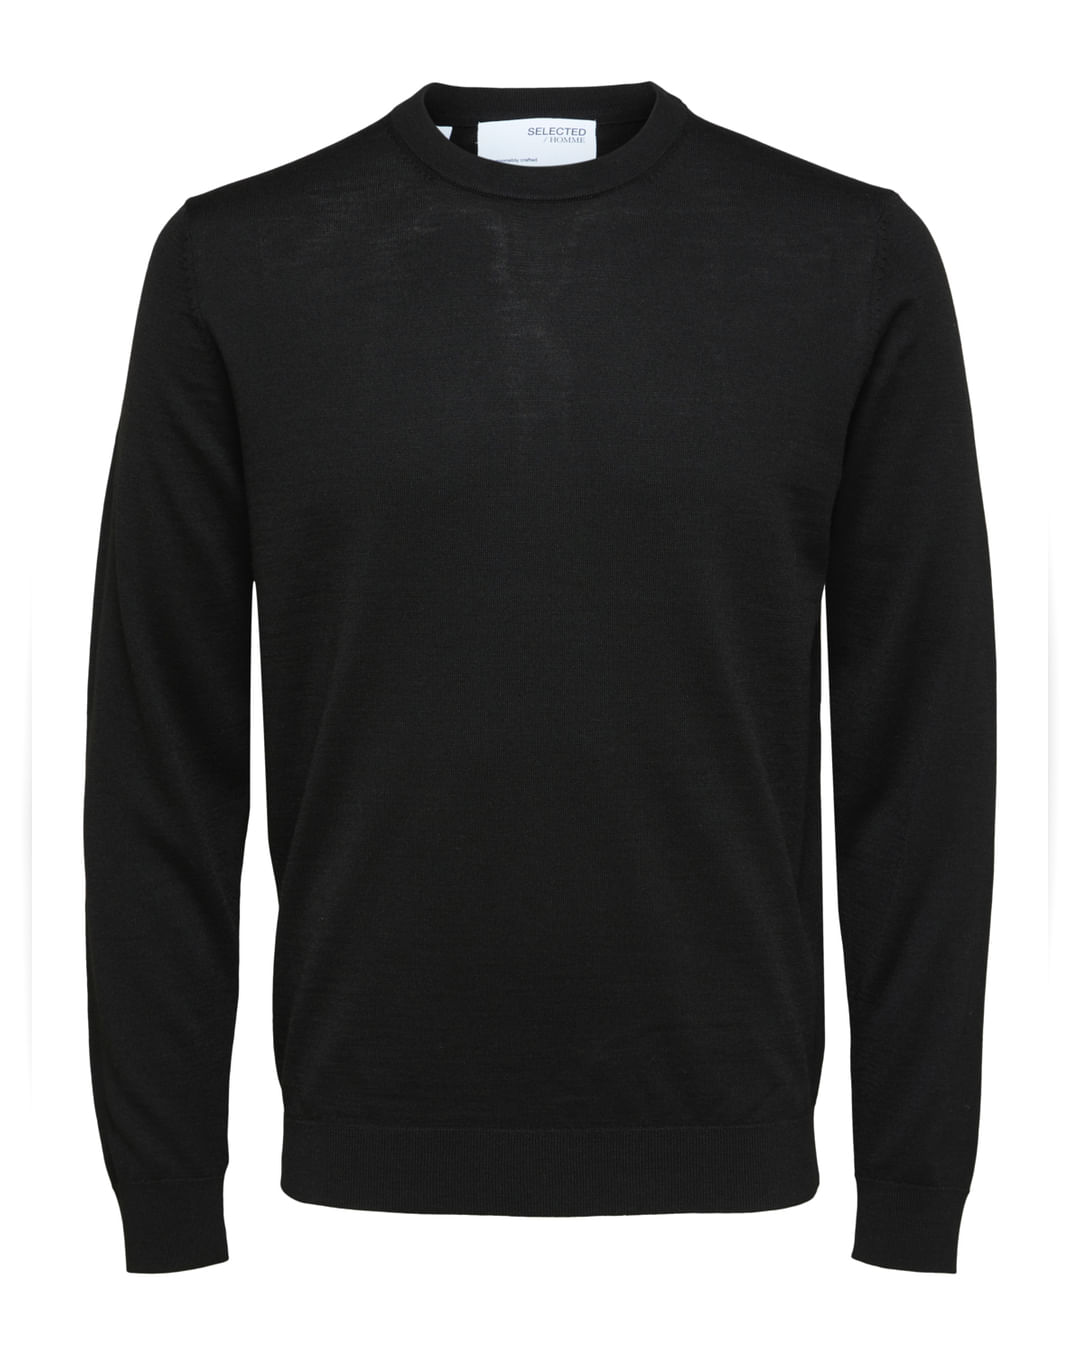 Buy Black Crew Neck Pullover Online at SELECTED HOMME